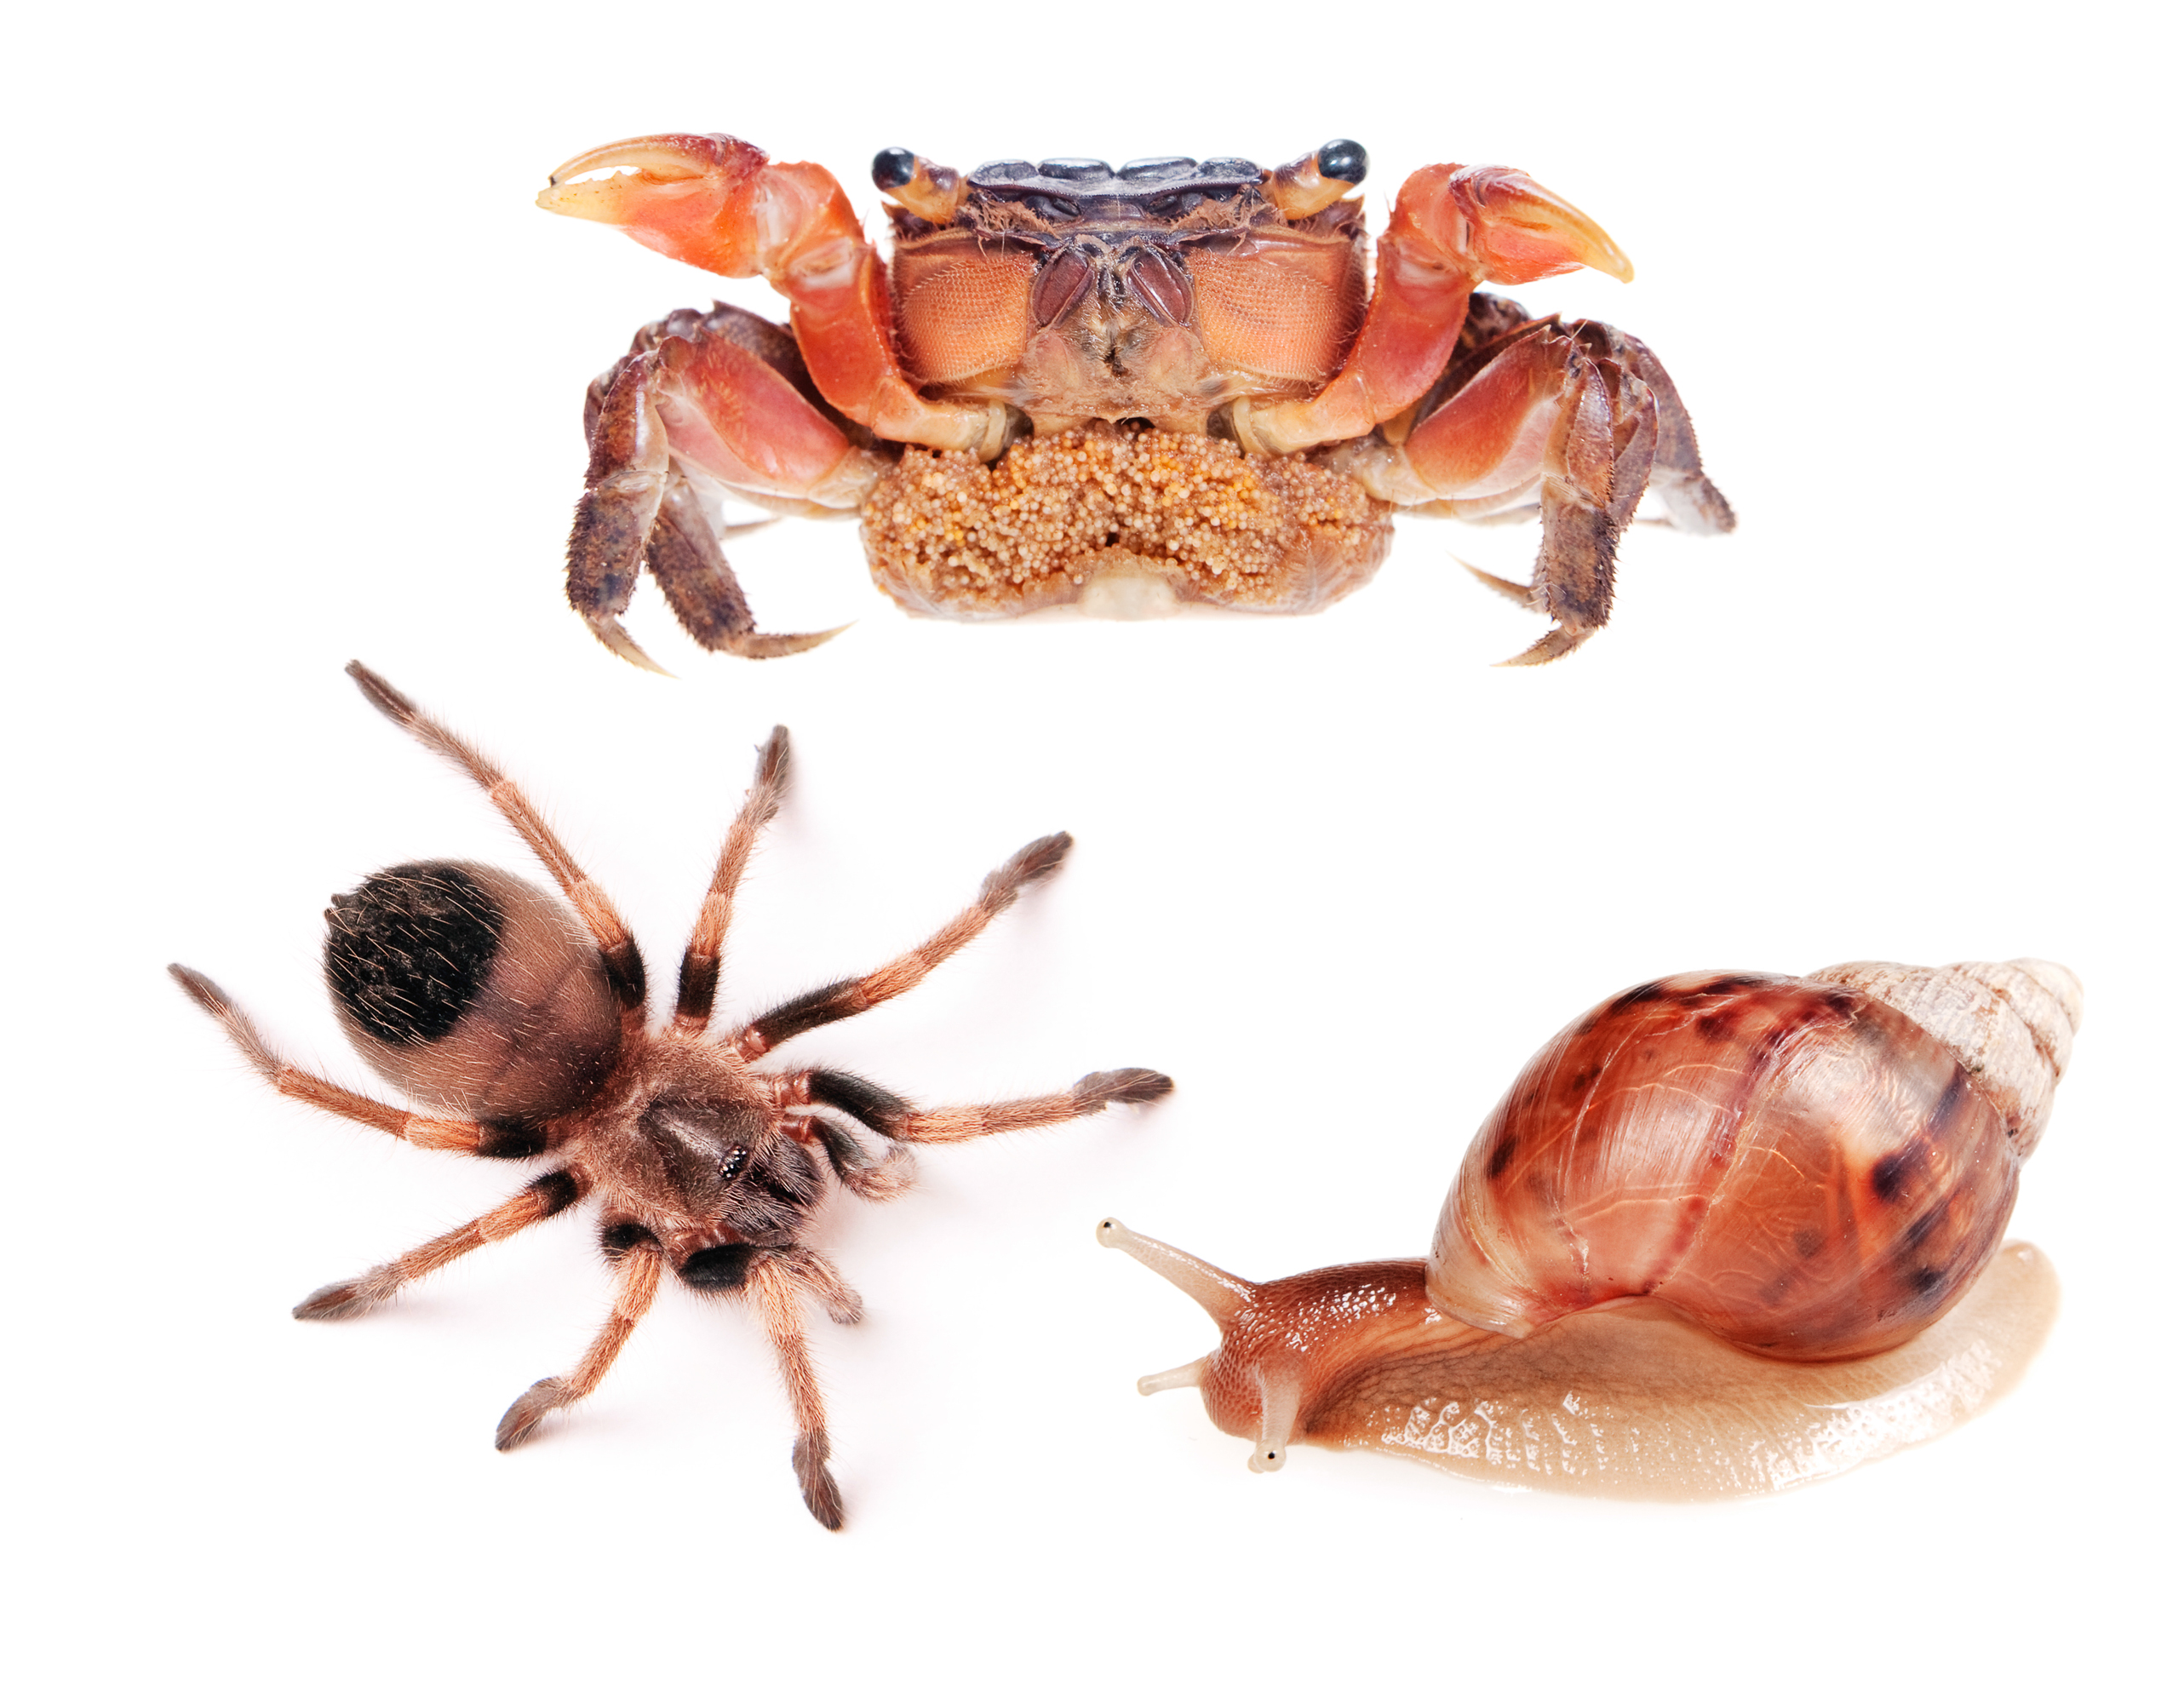 Spider, snail and crab photo